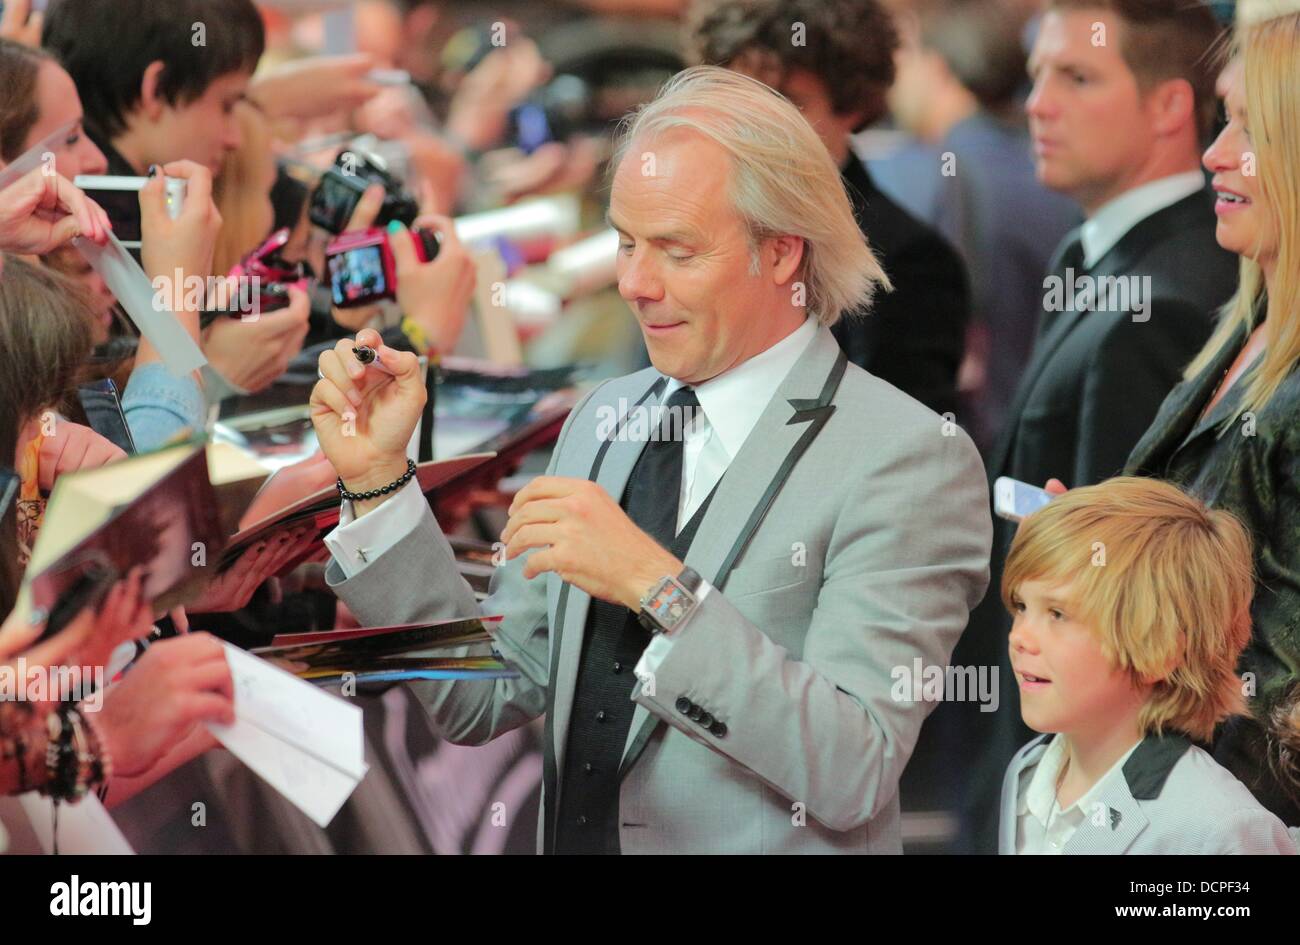 Berlin, Germany. 20th Aug, 2013. Norwegian director Harald Zwart  attends to the premiere of his new film 'The Mortal Instruments: City of Bones' at the Sony Center in Belrin, Germany, on August 20th, 2013. © dpa picture alliance/Alamy Live News Stock Photo